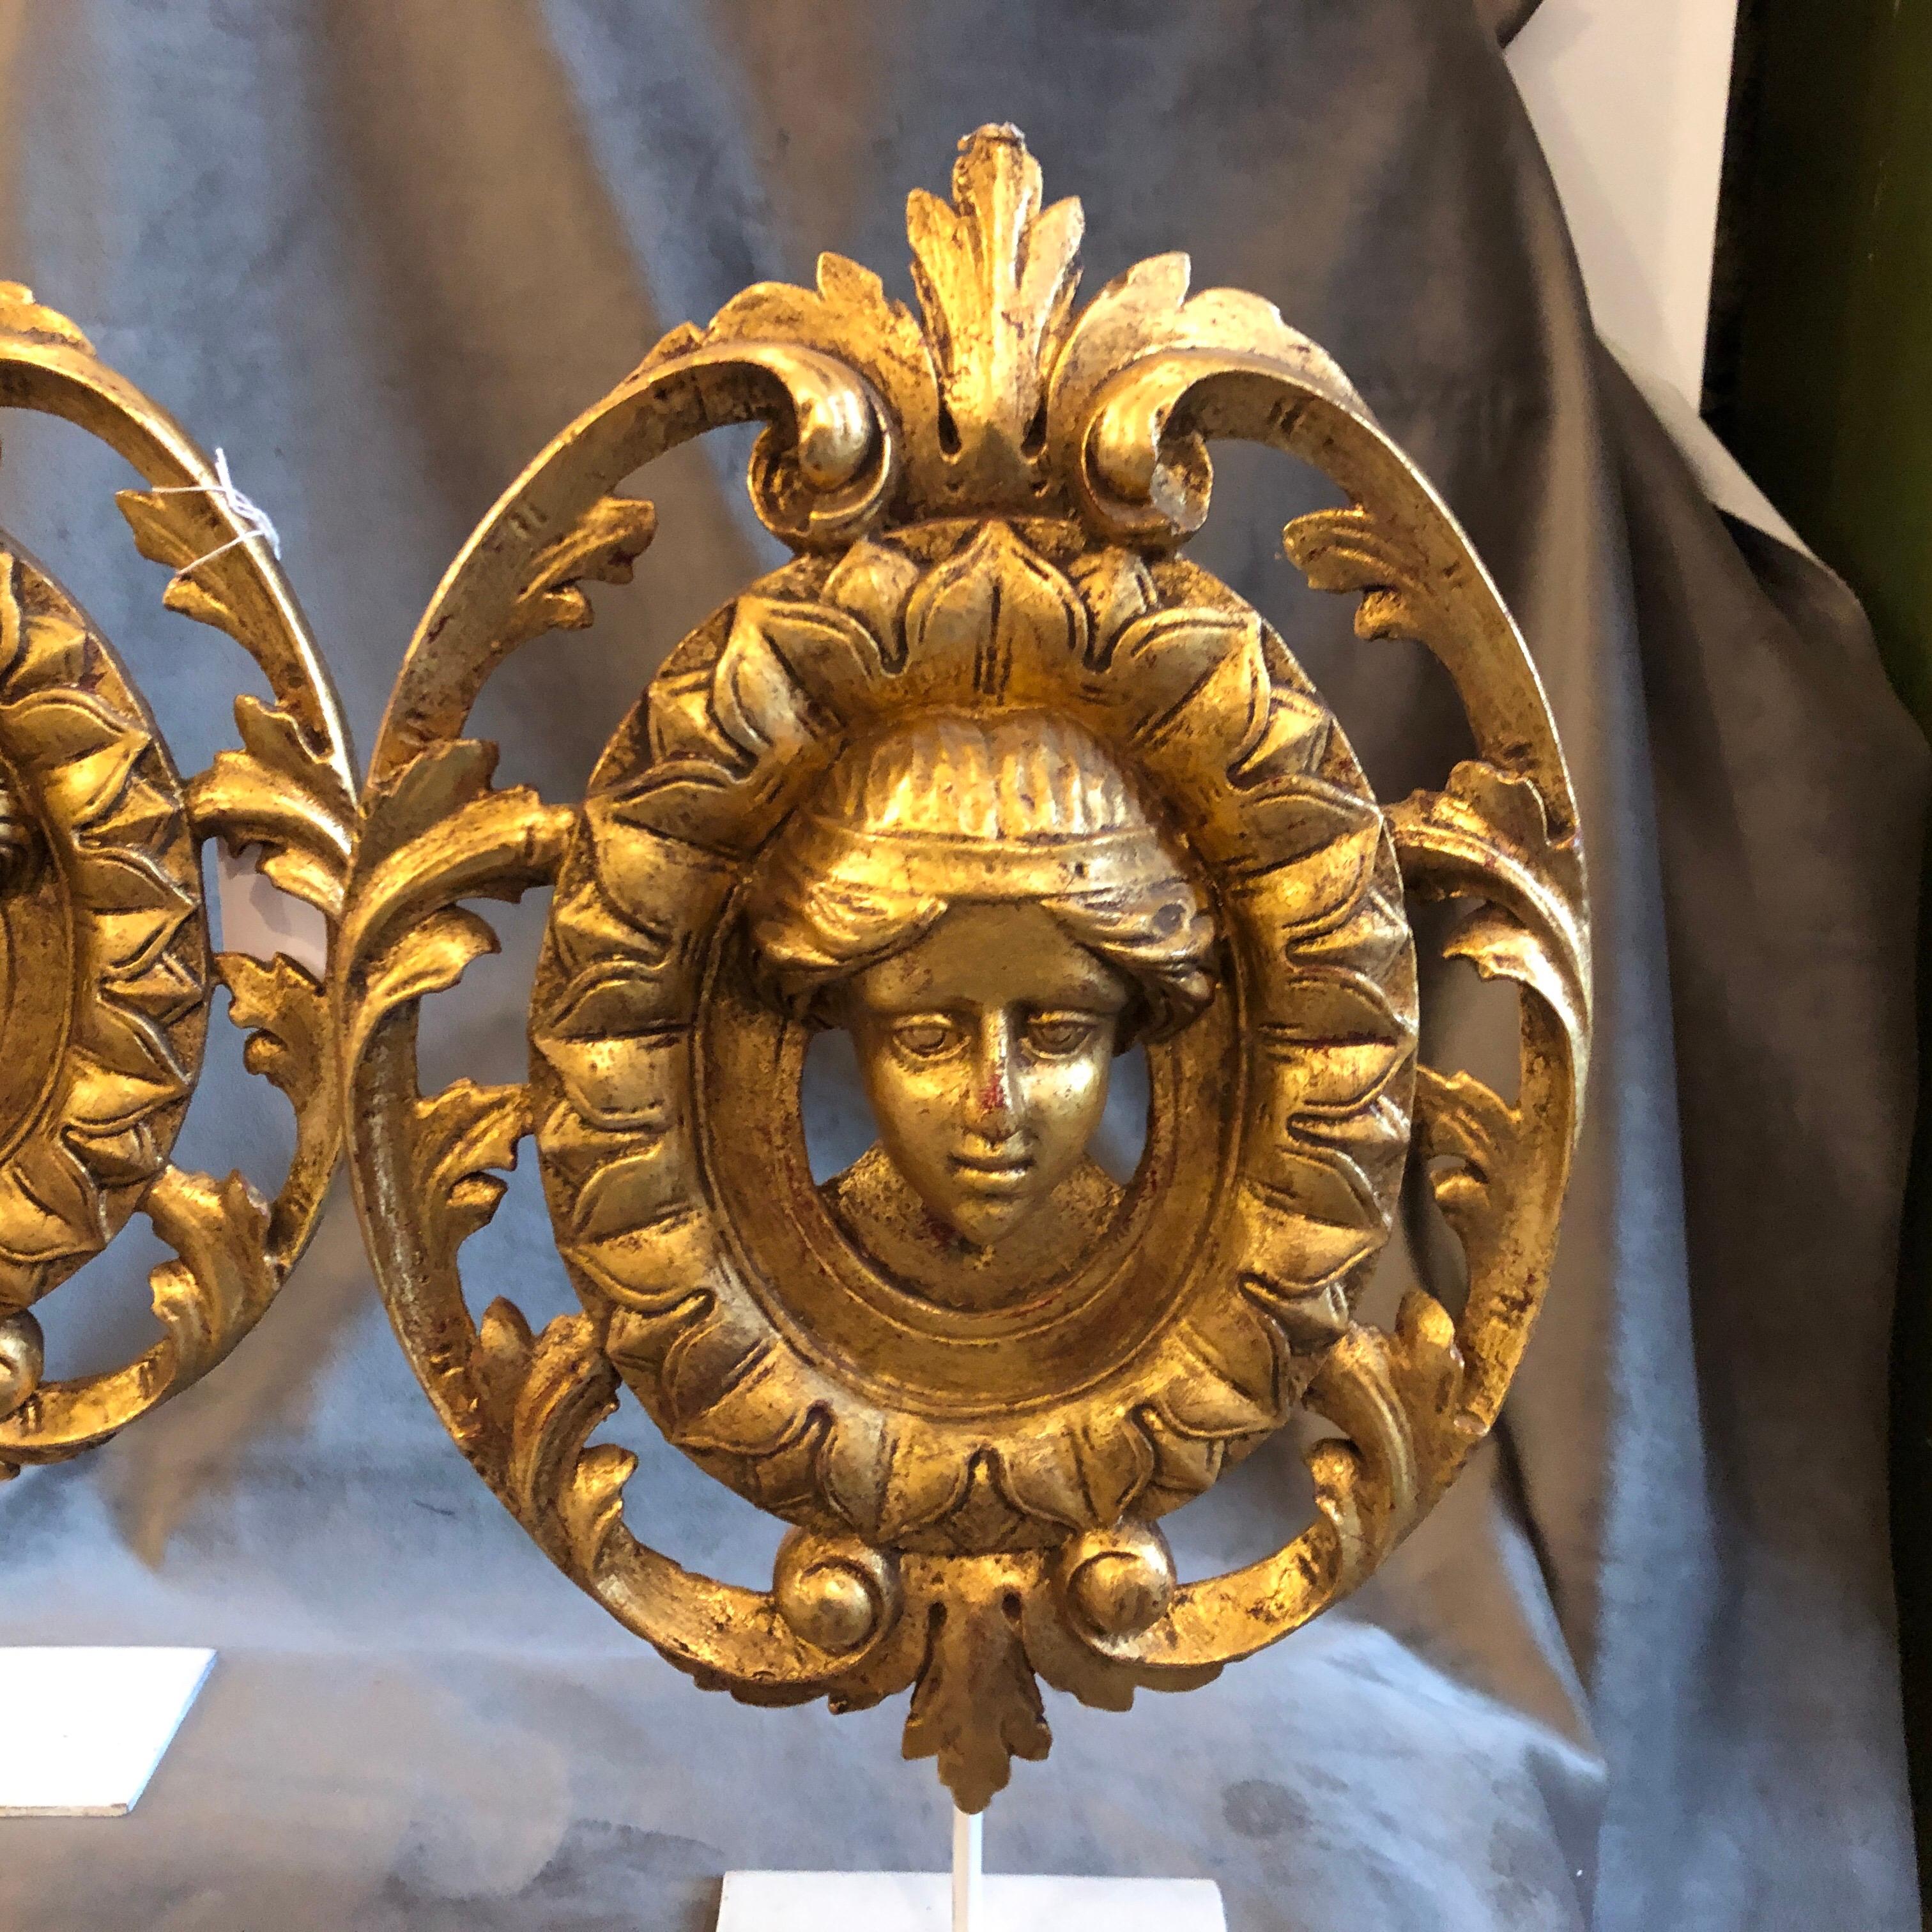 Set of two gilded wood friezes hand carved in Italy in 1900. Probably they came from a door or a furniture, they are mounted on a white painted metal pedestal.